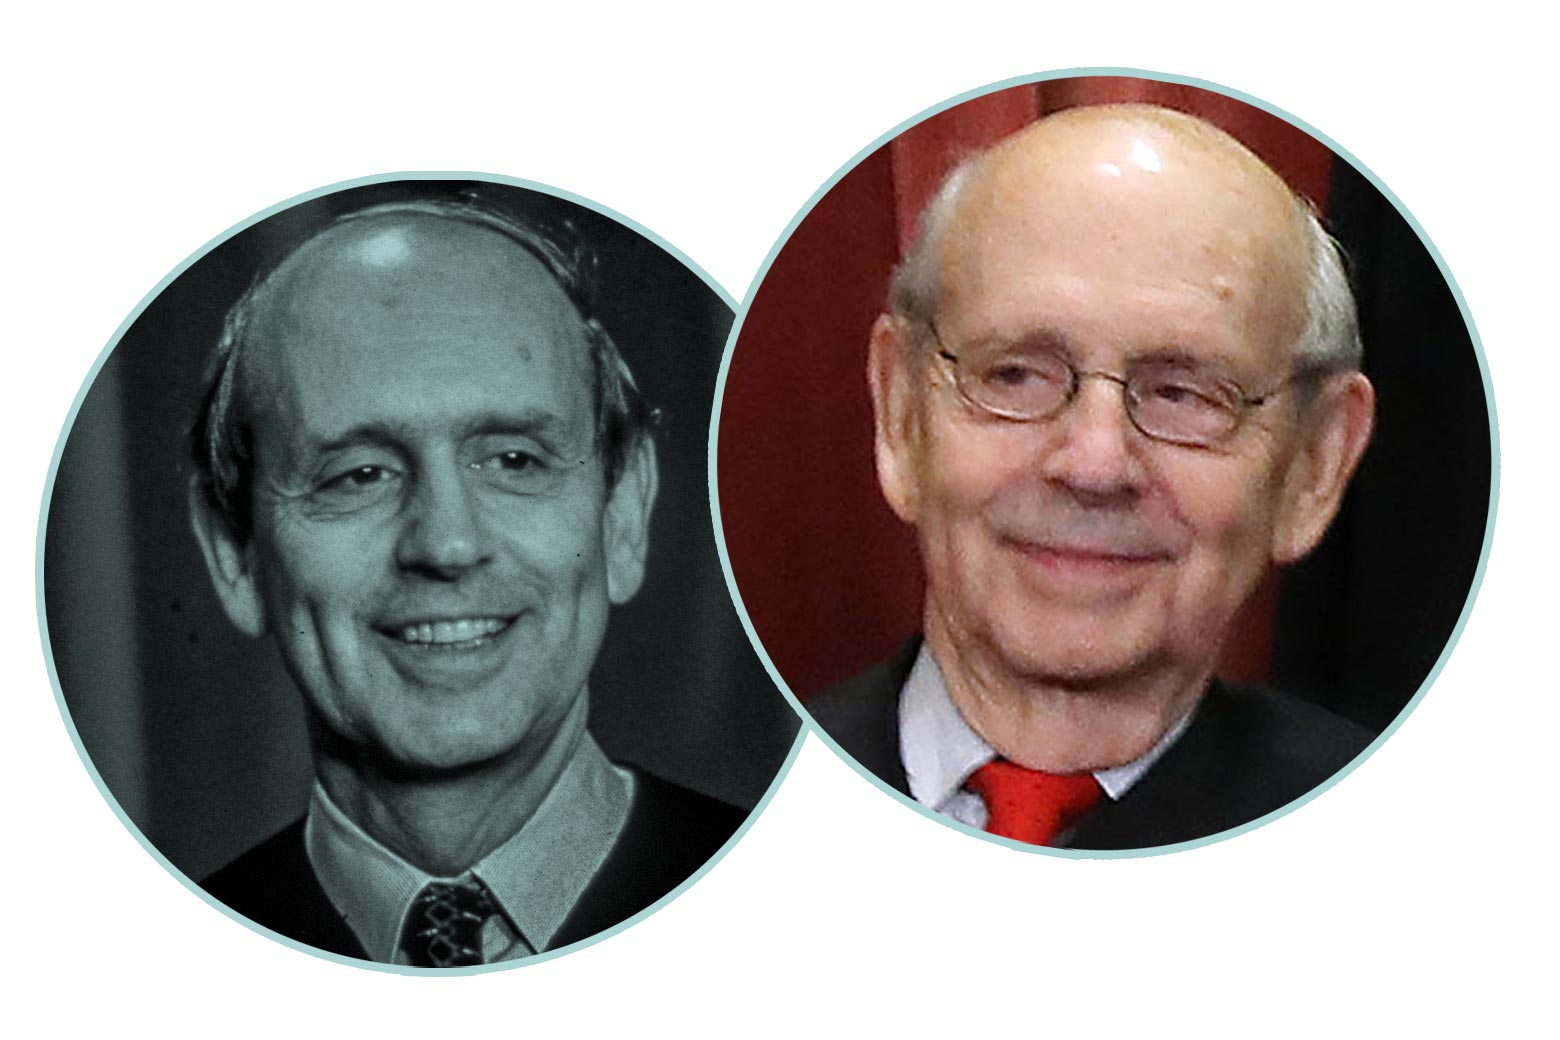 Justice Stephen Breyer in 1994 and 2018.